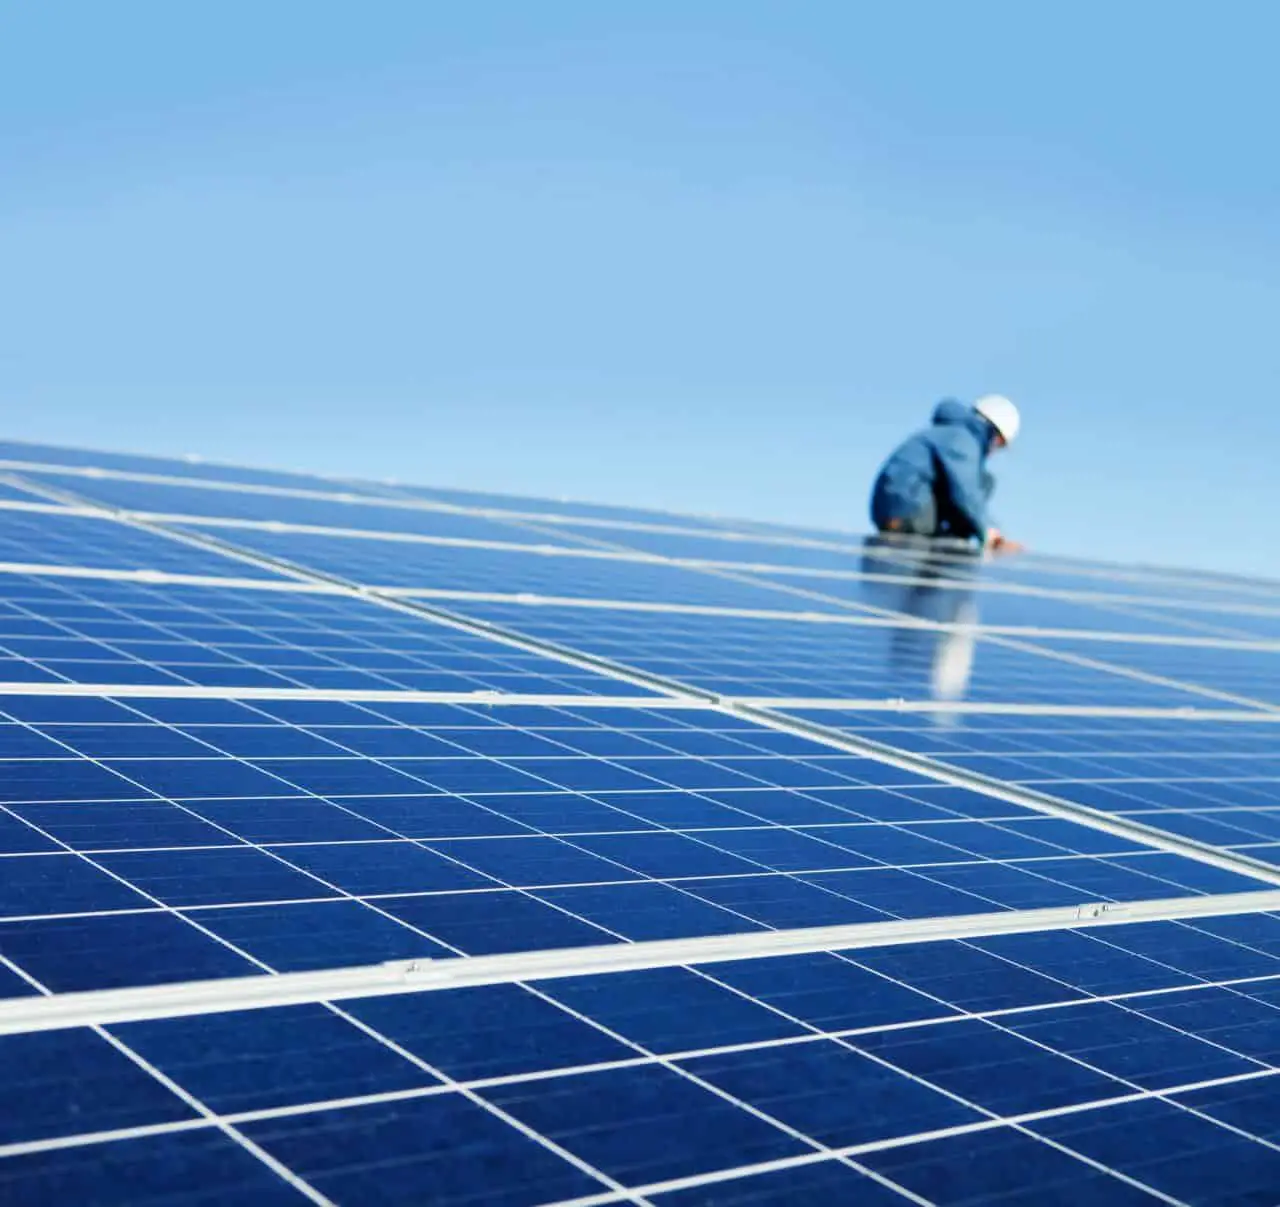 How Long Does a San Diego Solar Panel Installation Take?